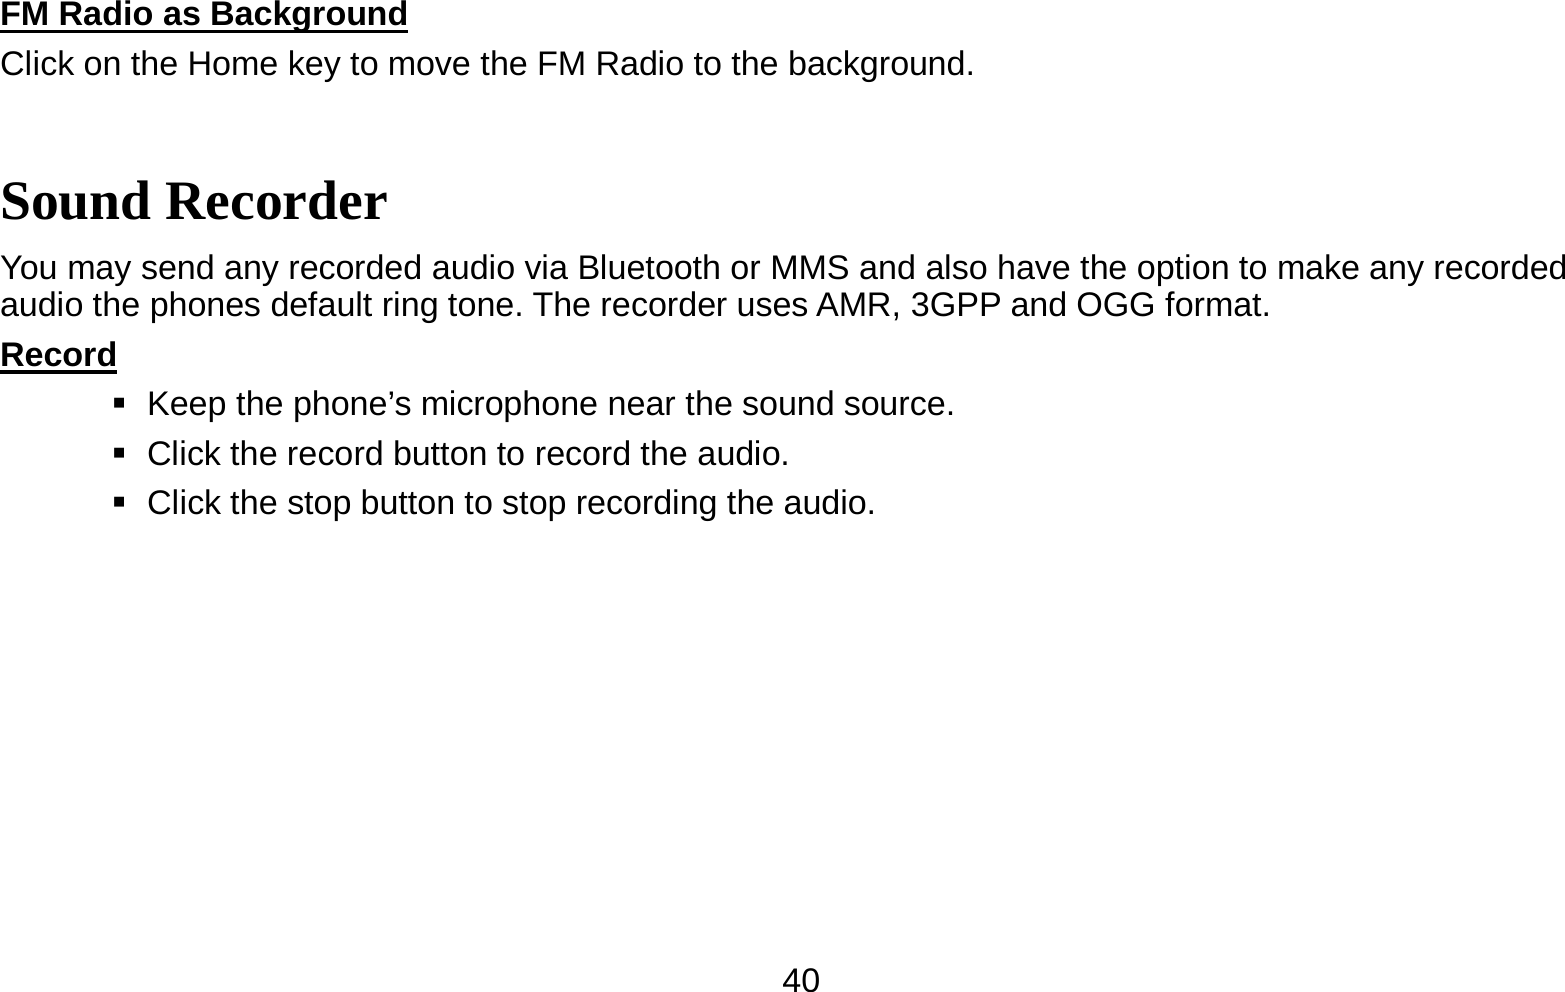   40FM Radio as Background                                                                          Click on the Home key to move the FM Radio to the background. Sound Recorder You may send any recorded audio via Bluetooth or MMS and also have the option to make any recorded audio the phones default ring tone. The recorder uses AMR, 3GPP and OGG format. Record                                                                                               Keep the phone’s microphone near the sound source.    Click the record button to record the audio.    Click the stop button to stop recording the audio. 